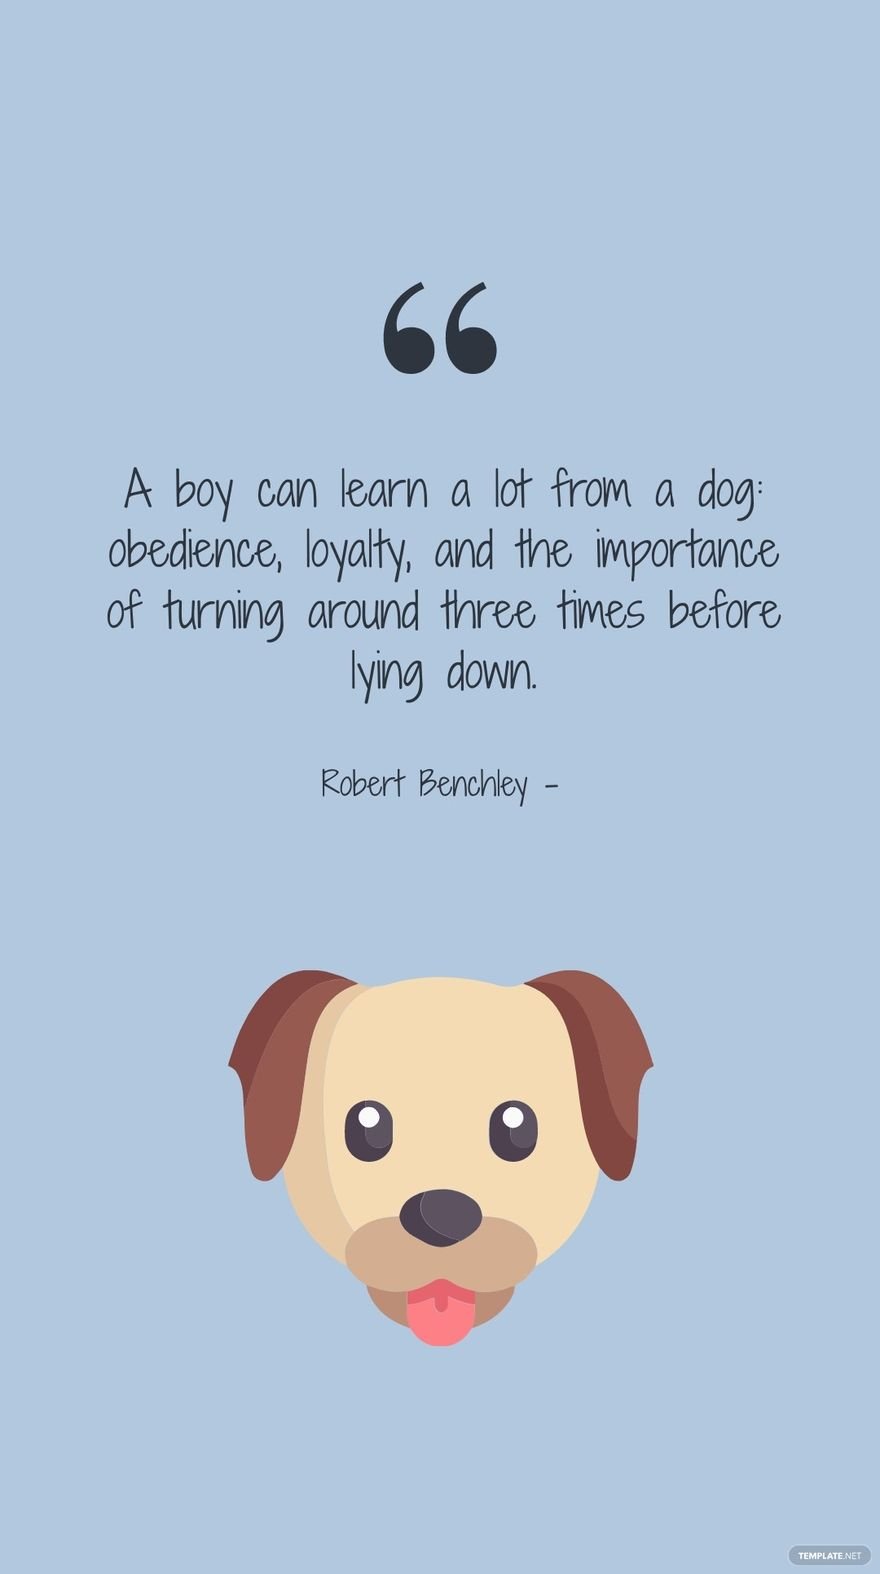 Robert Benchley - A boy can learn a lot from a dog: obedience, loyalty, and the importance of turning around three times before lying down.